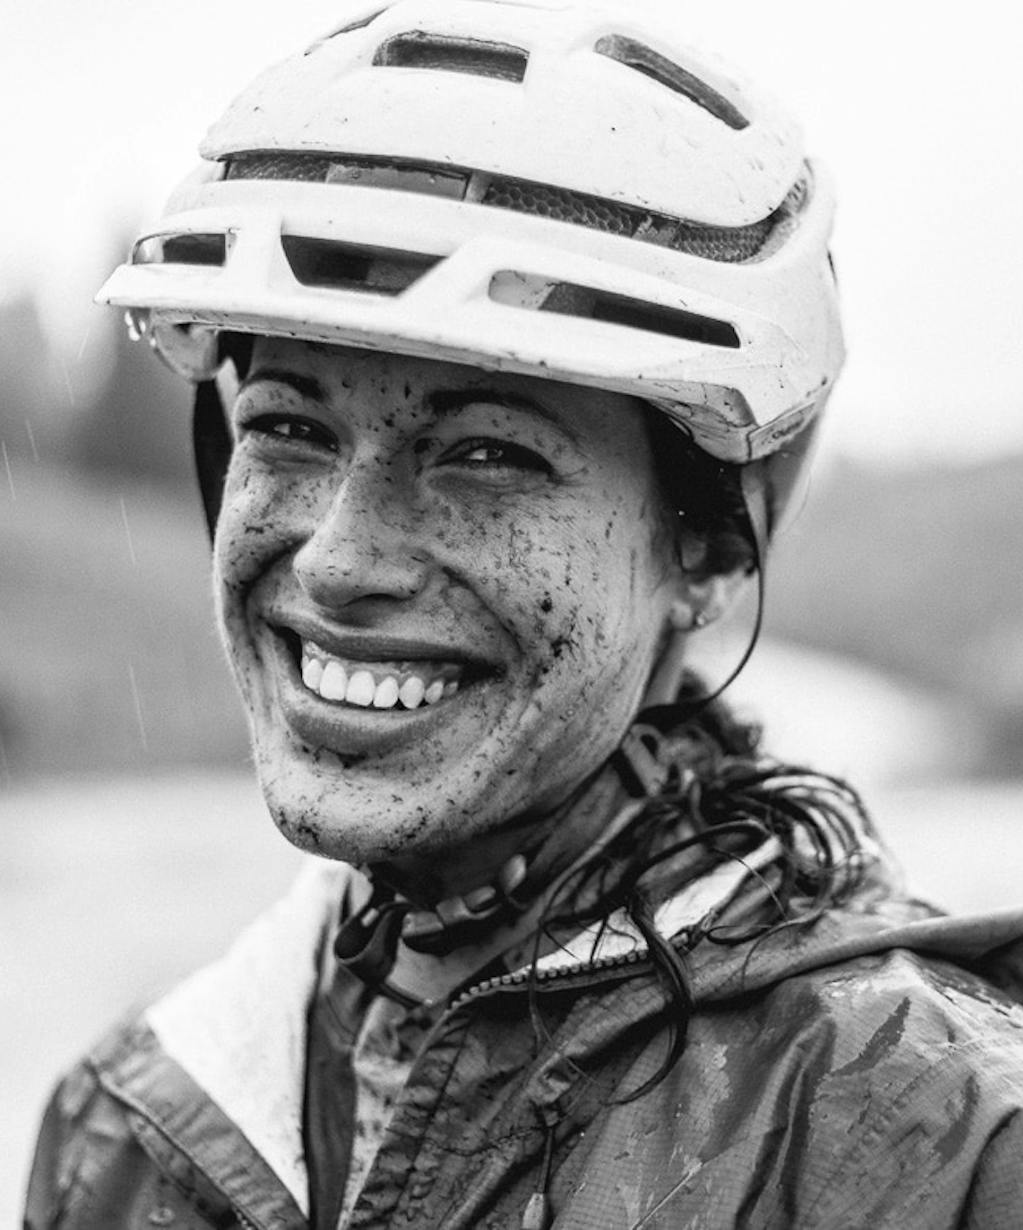 Nichole Baker with a happy mud-splattered face.